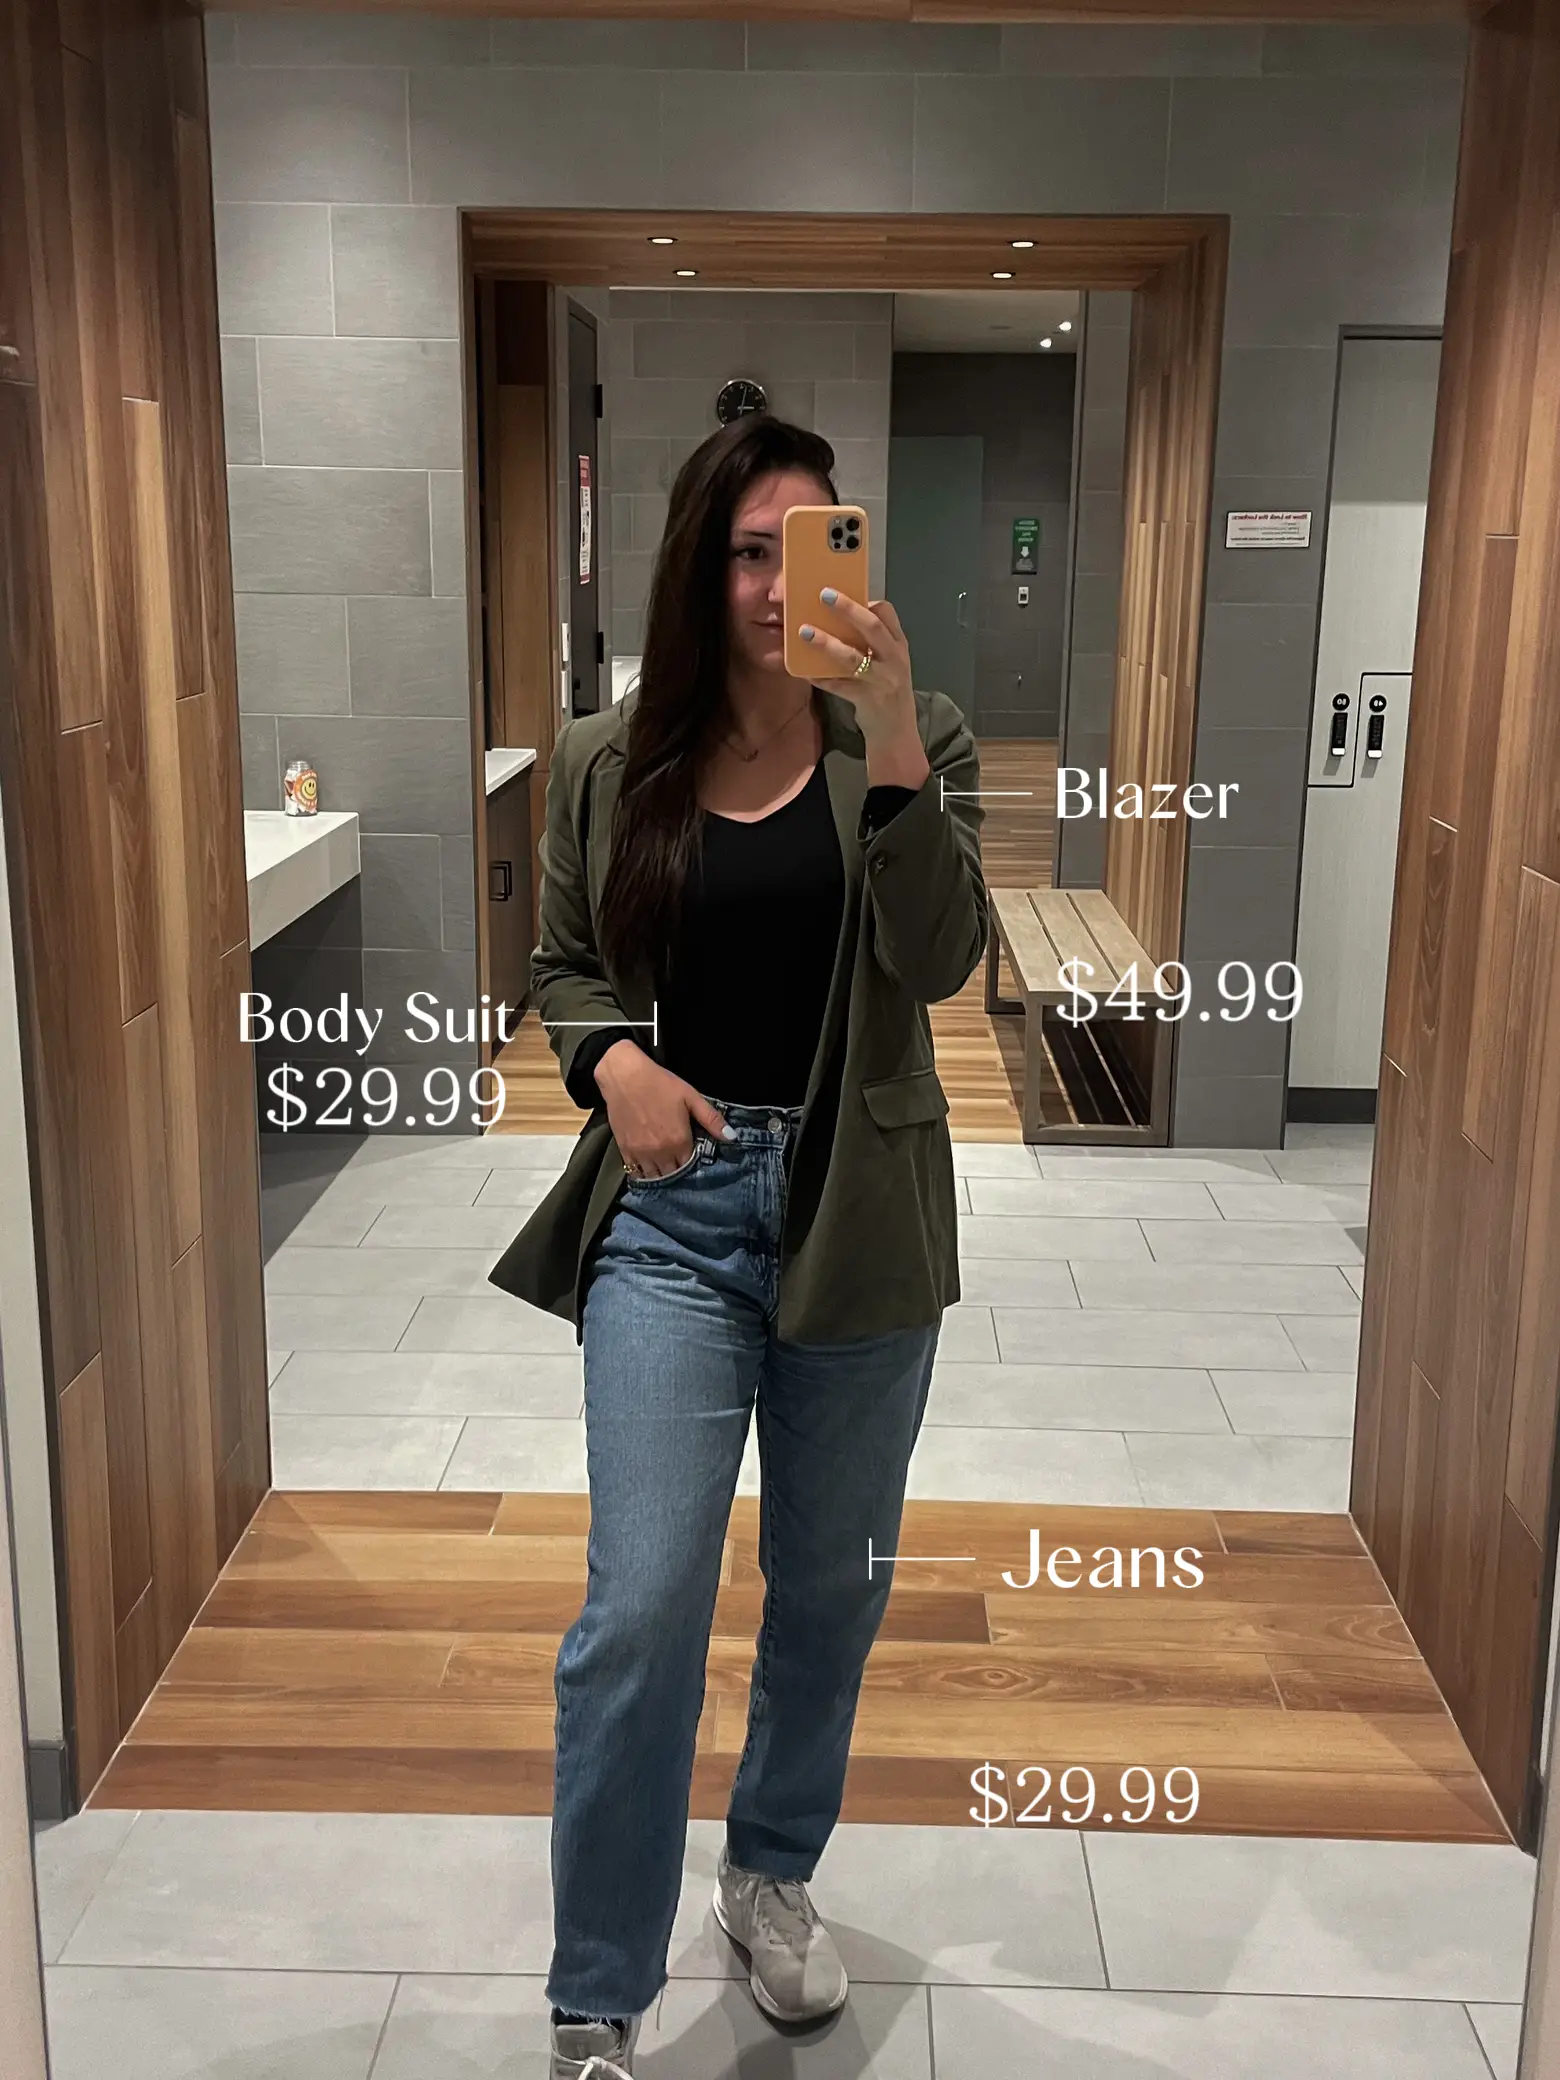 Mr Price jeans try on haul, Fitting & styling the jeans 👖🥂❤️